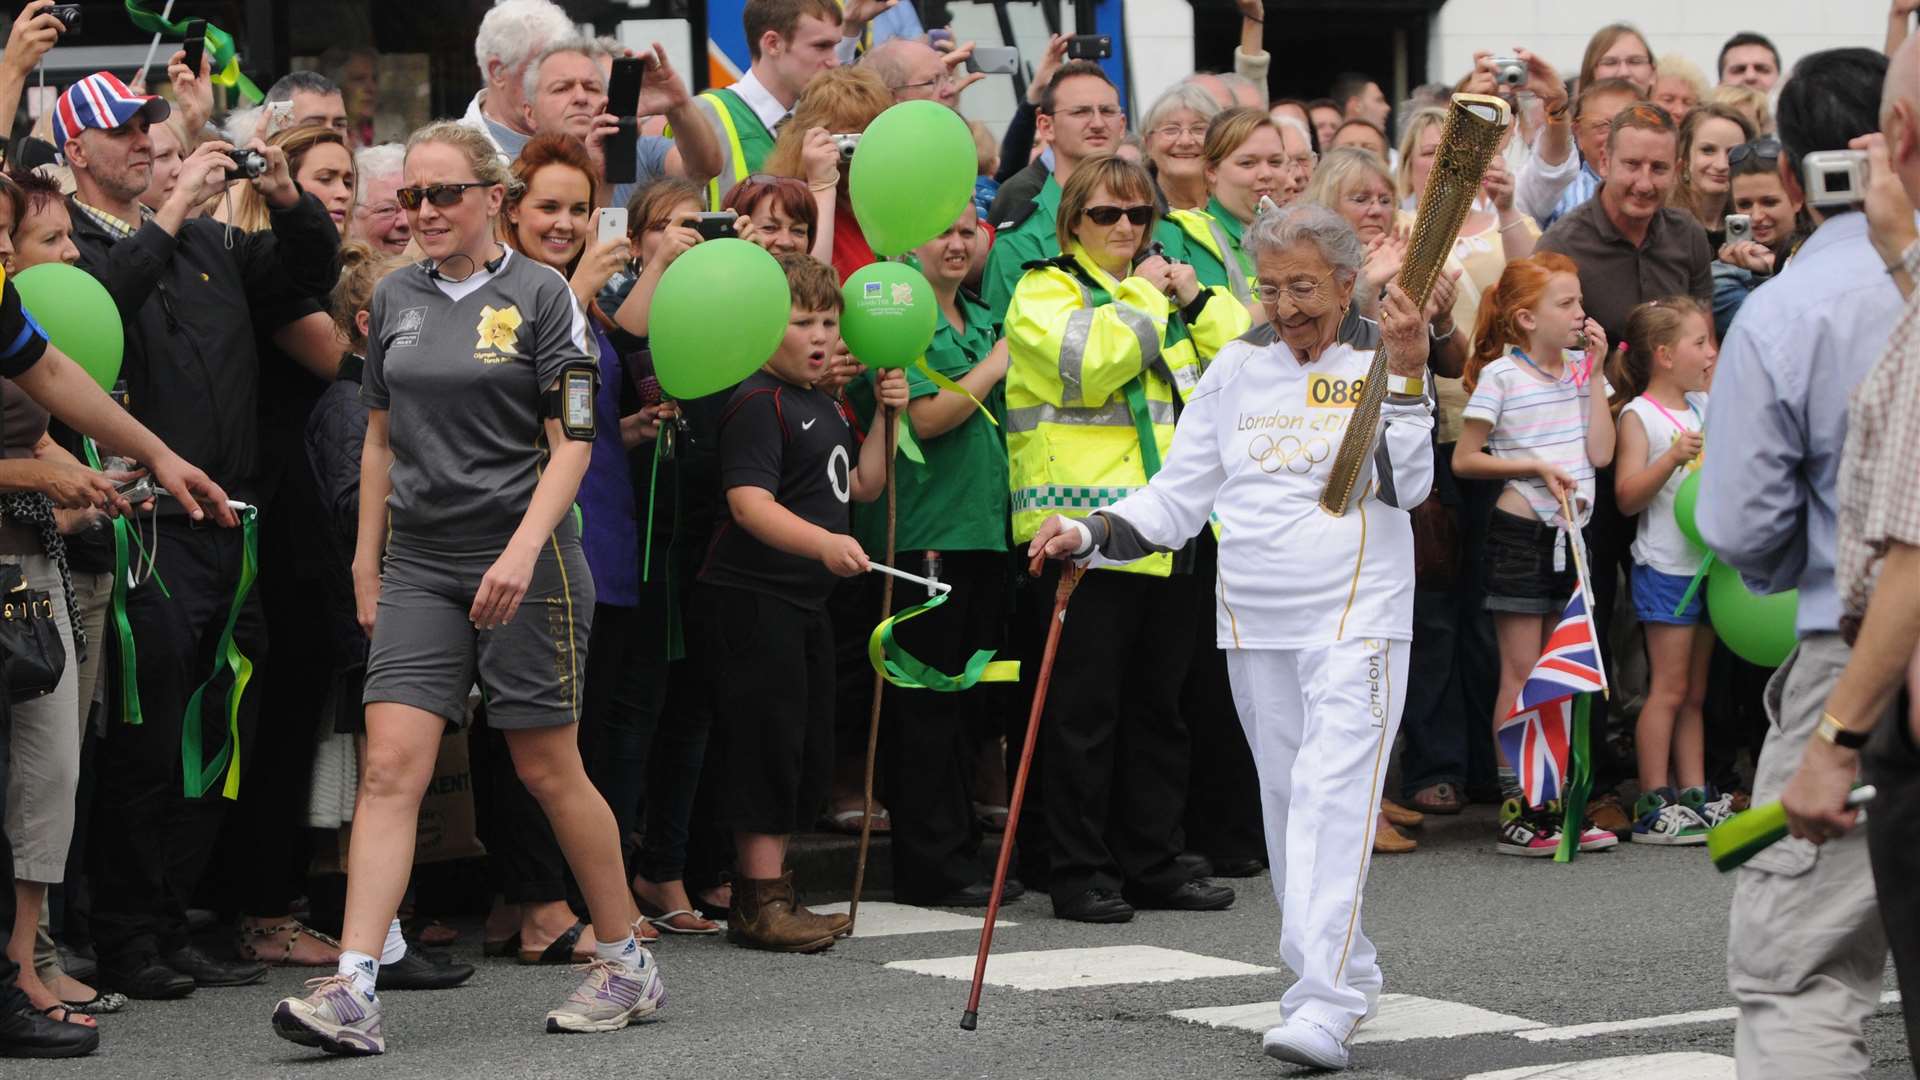 Paddy Rayner carried the Olympic Torch in front of cheering crowds in Birchington in 2012